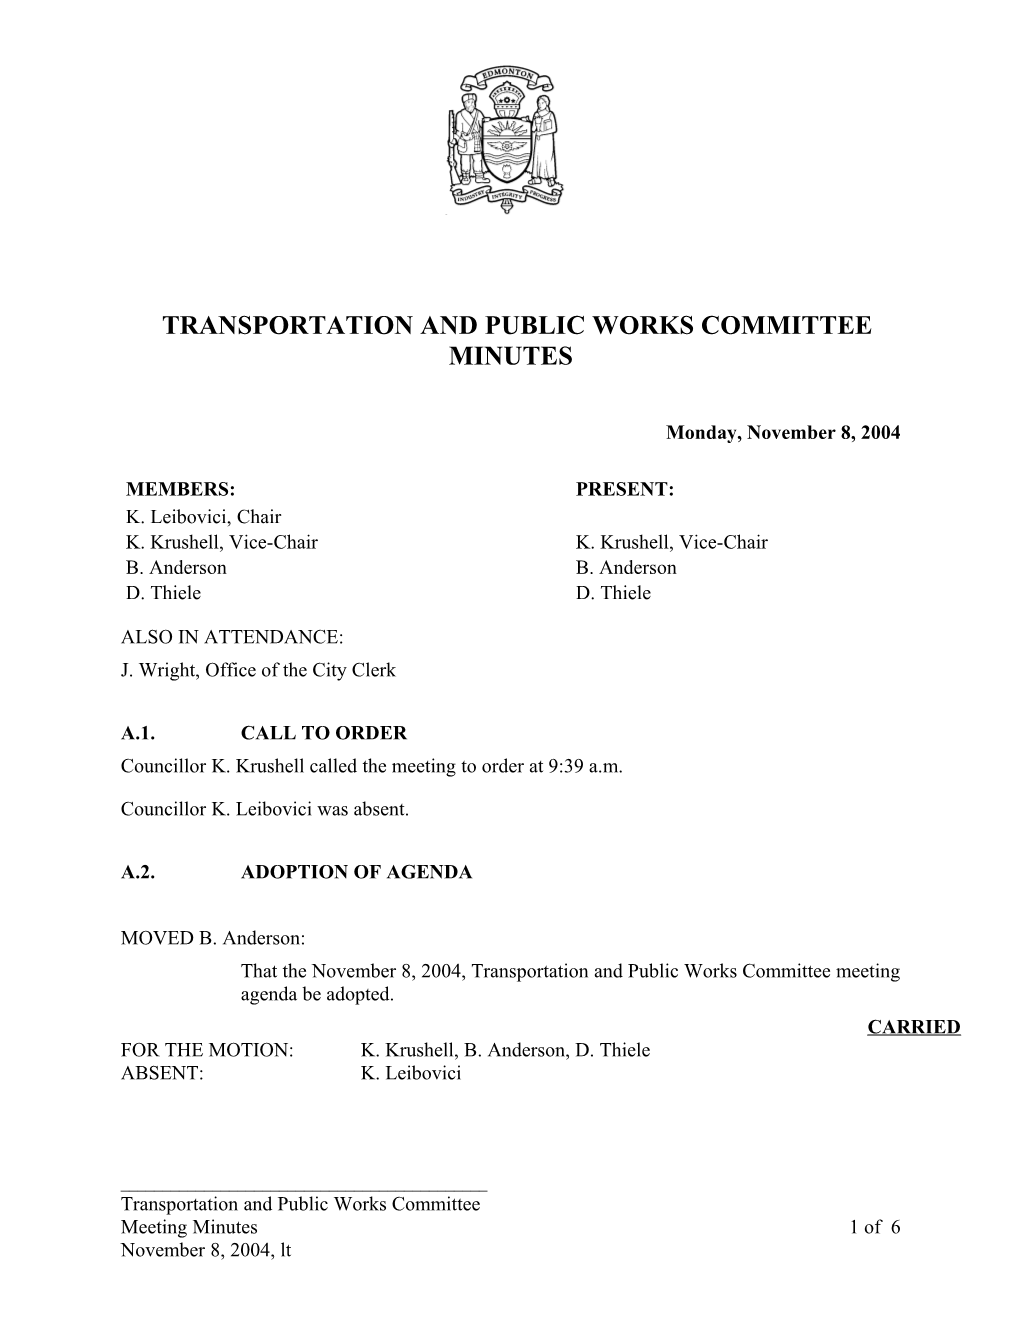 Minutes for Transportation and Public Works Committee November 8, 2004 Meeting